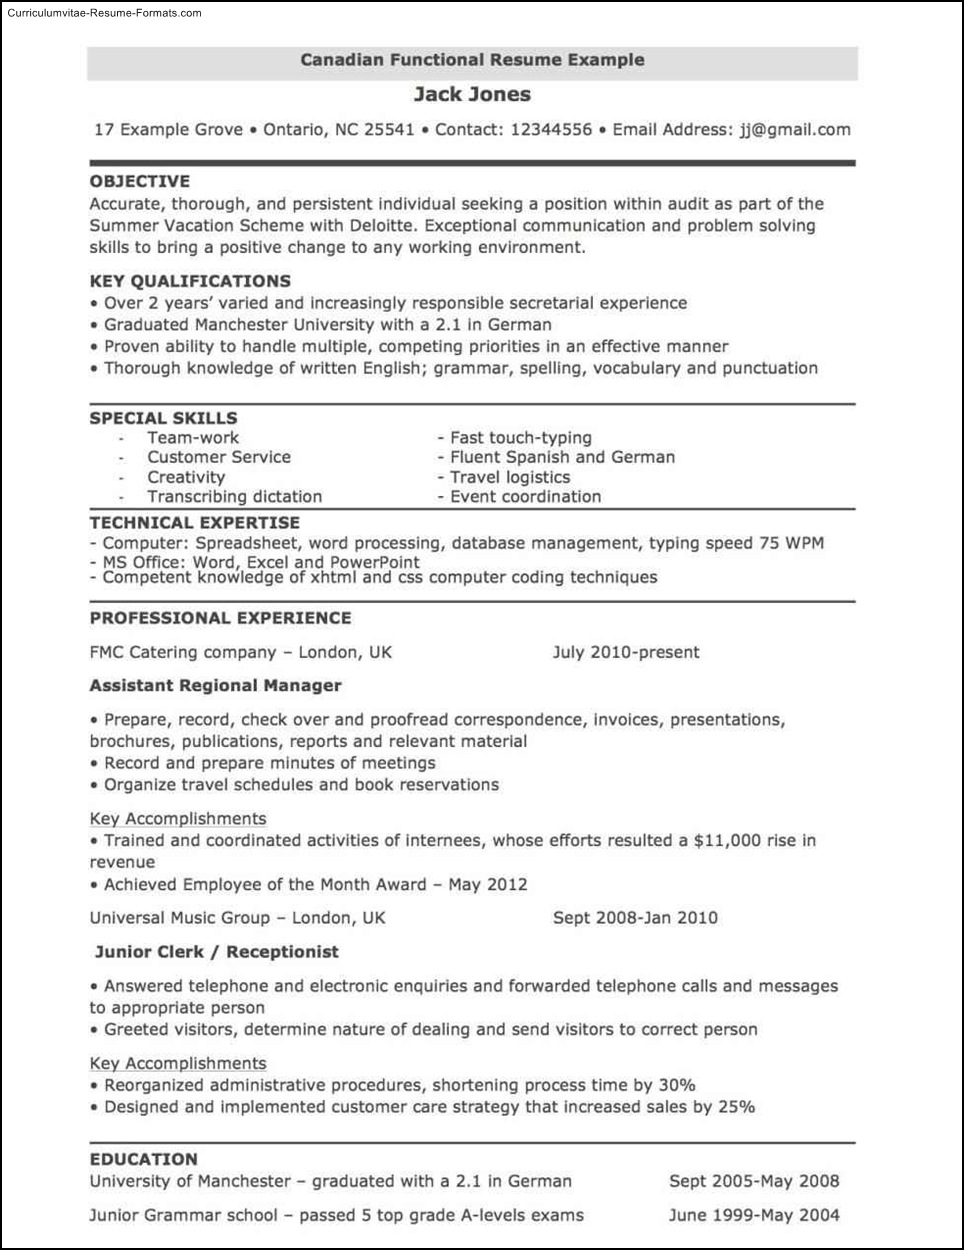 resume format for canadian employers